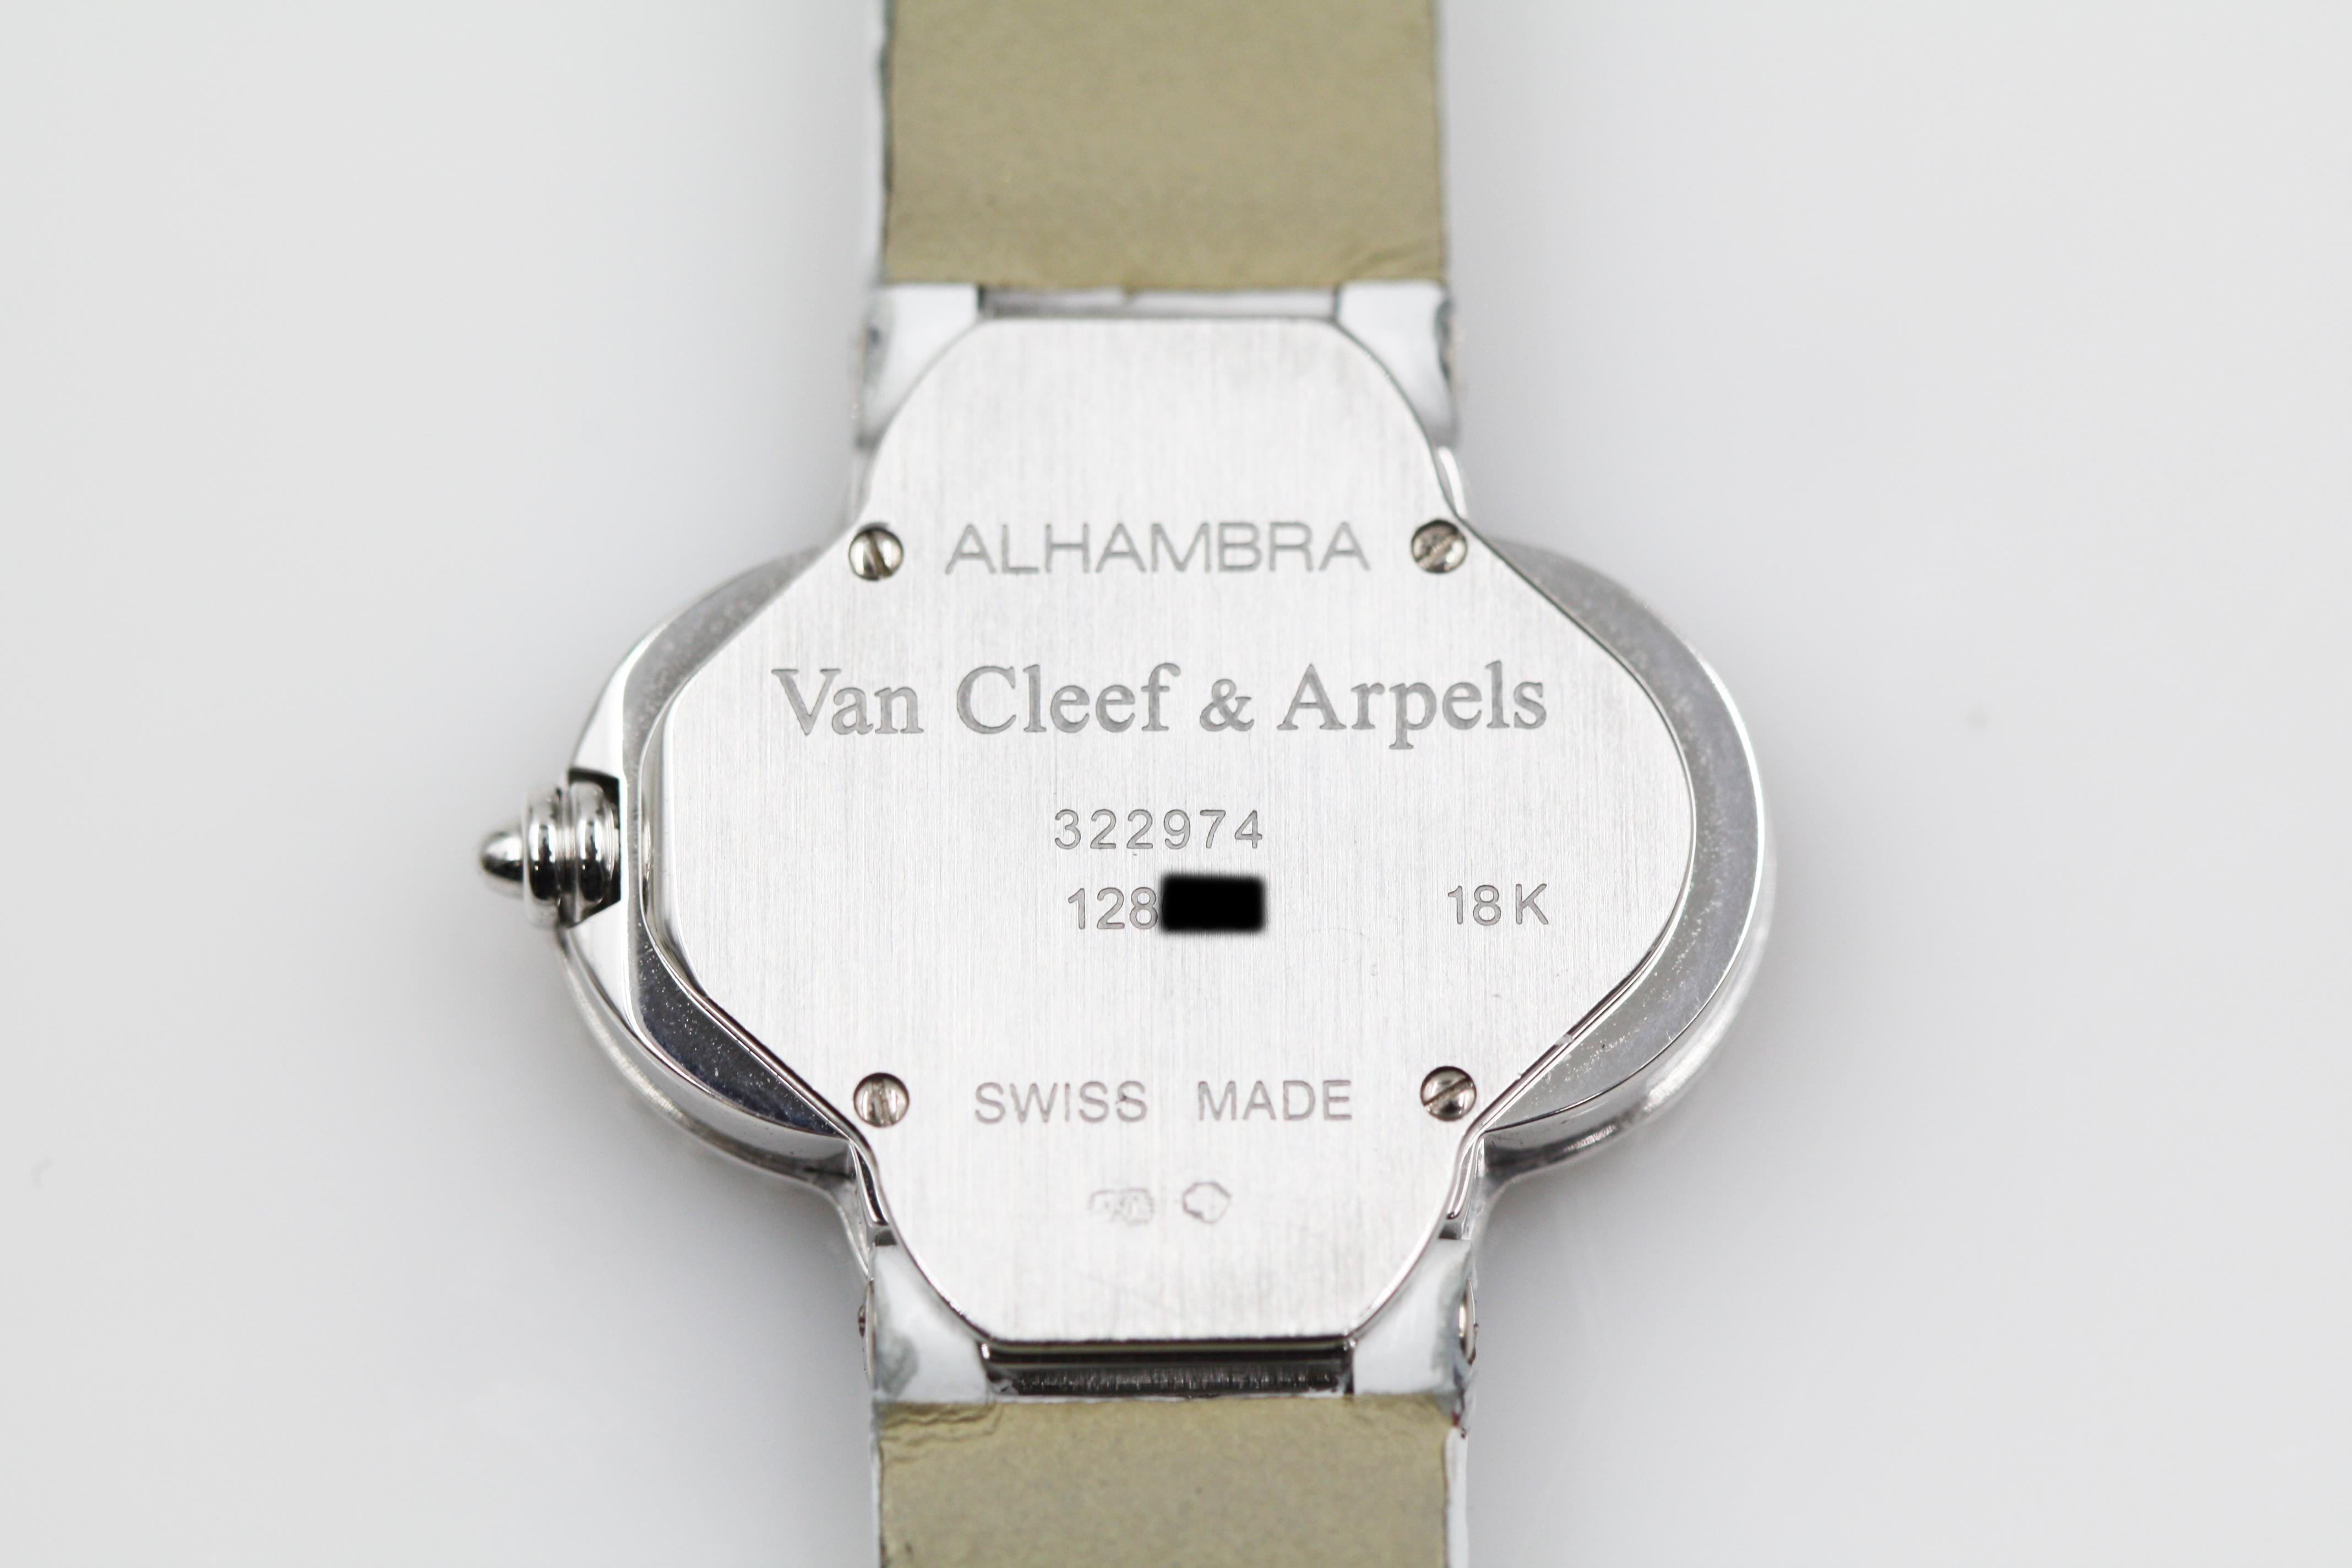 Van Cleef & Arpels Alhambra Small Model White Gold Lapis Watch For Sale 2